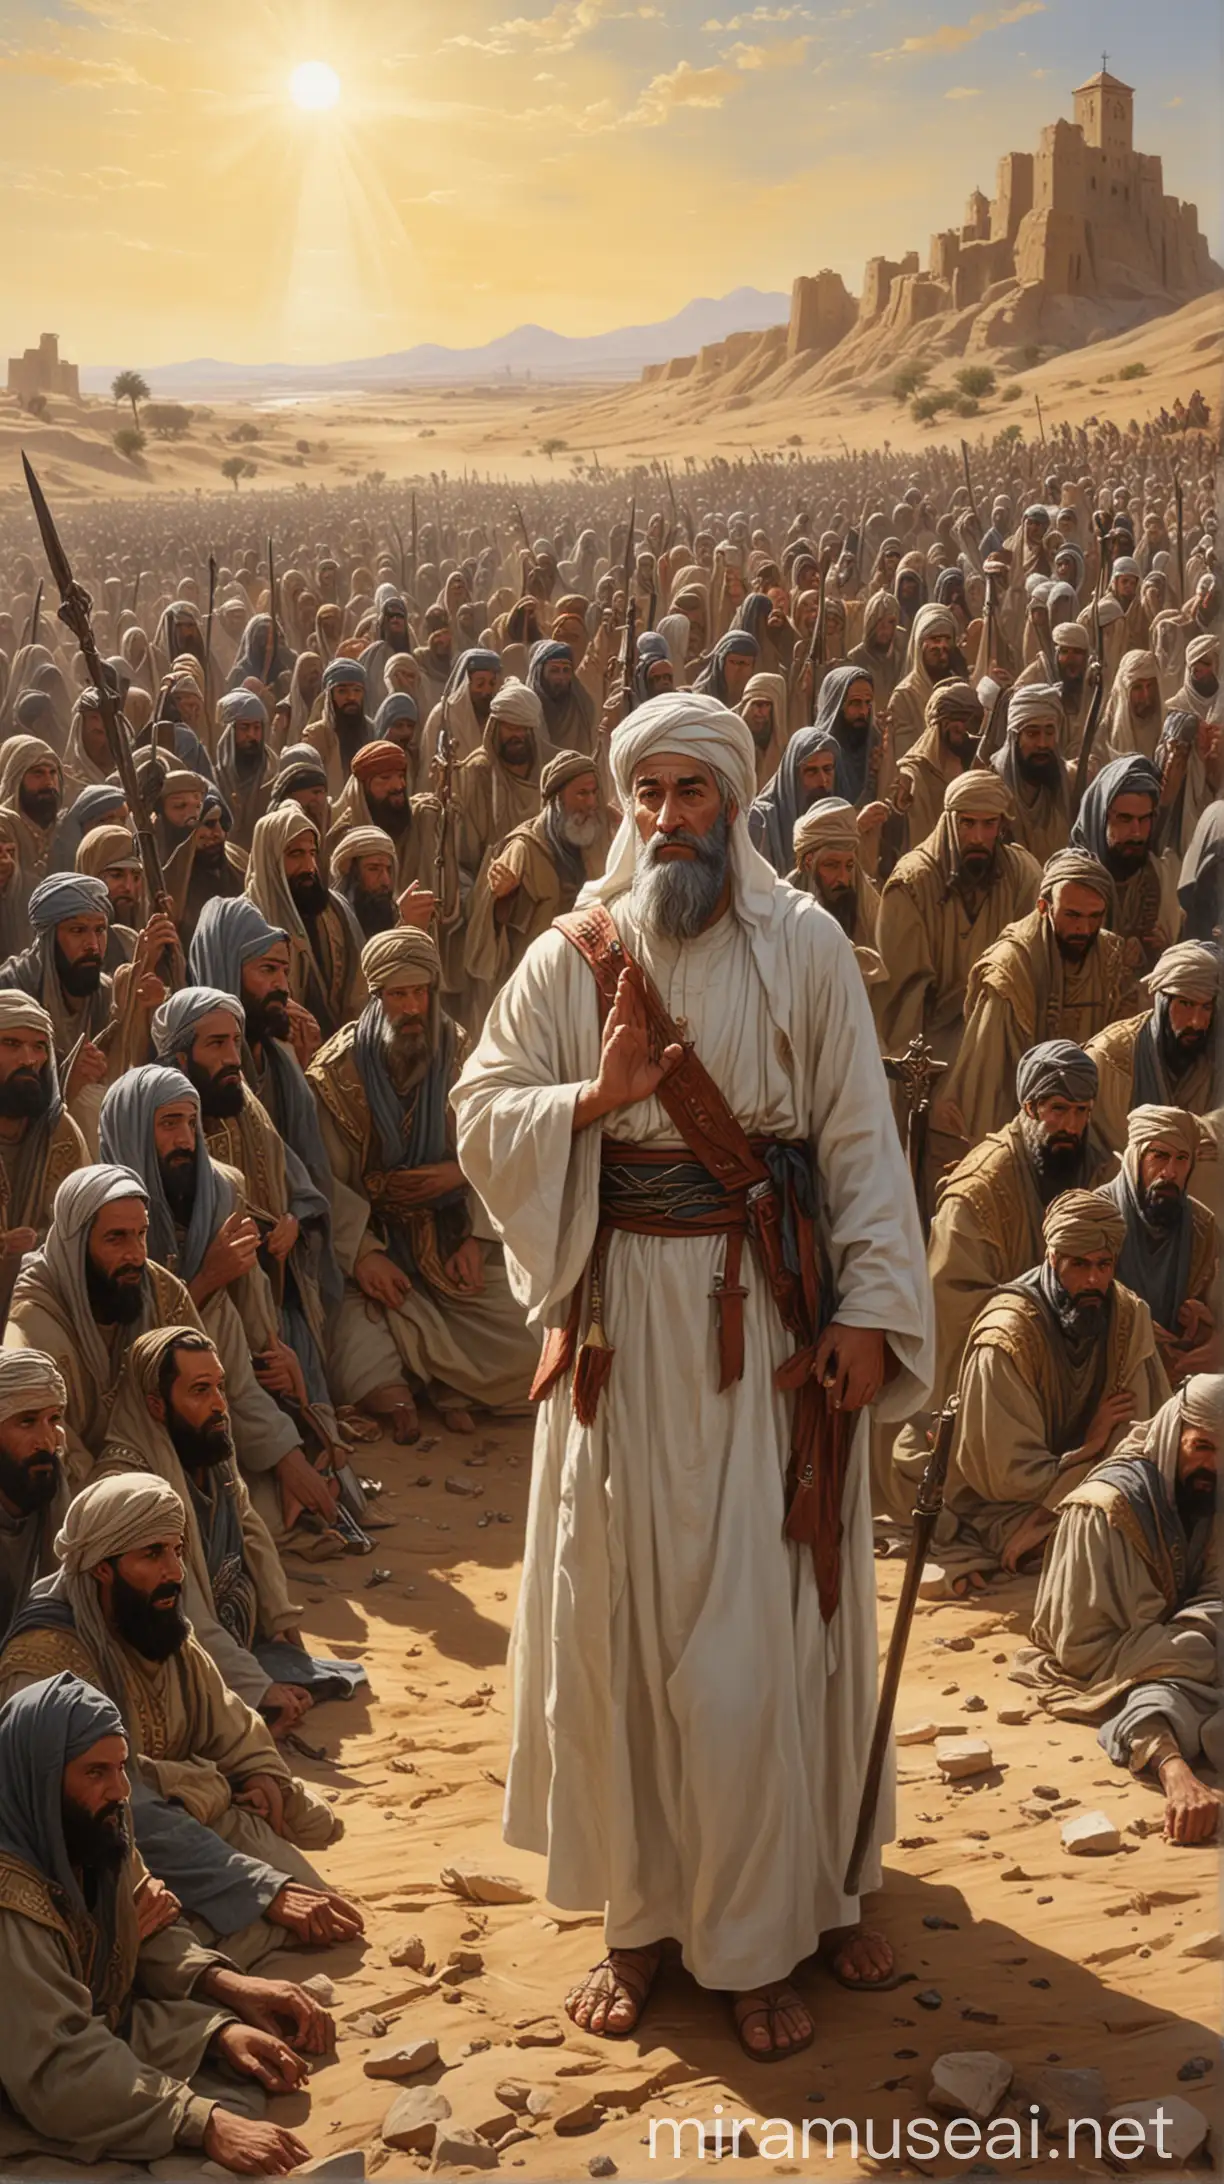 "Illustrate Baldwin leading his troops against Saladin's forces. Show him holding the relic of the true cross high, with his troops kneeling in prayer behind him, and Saladin's army visible in the distance." hyper realistic